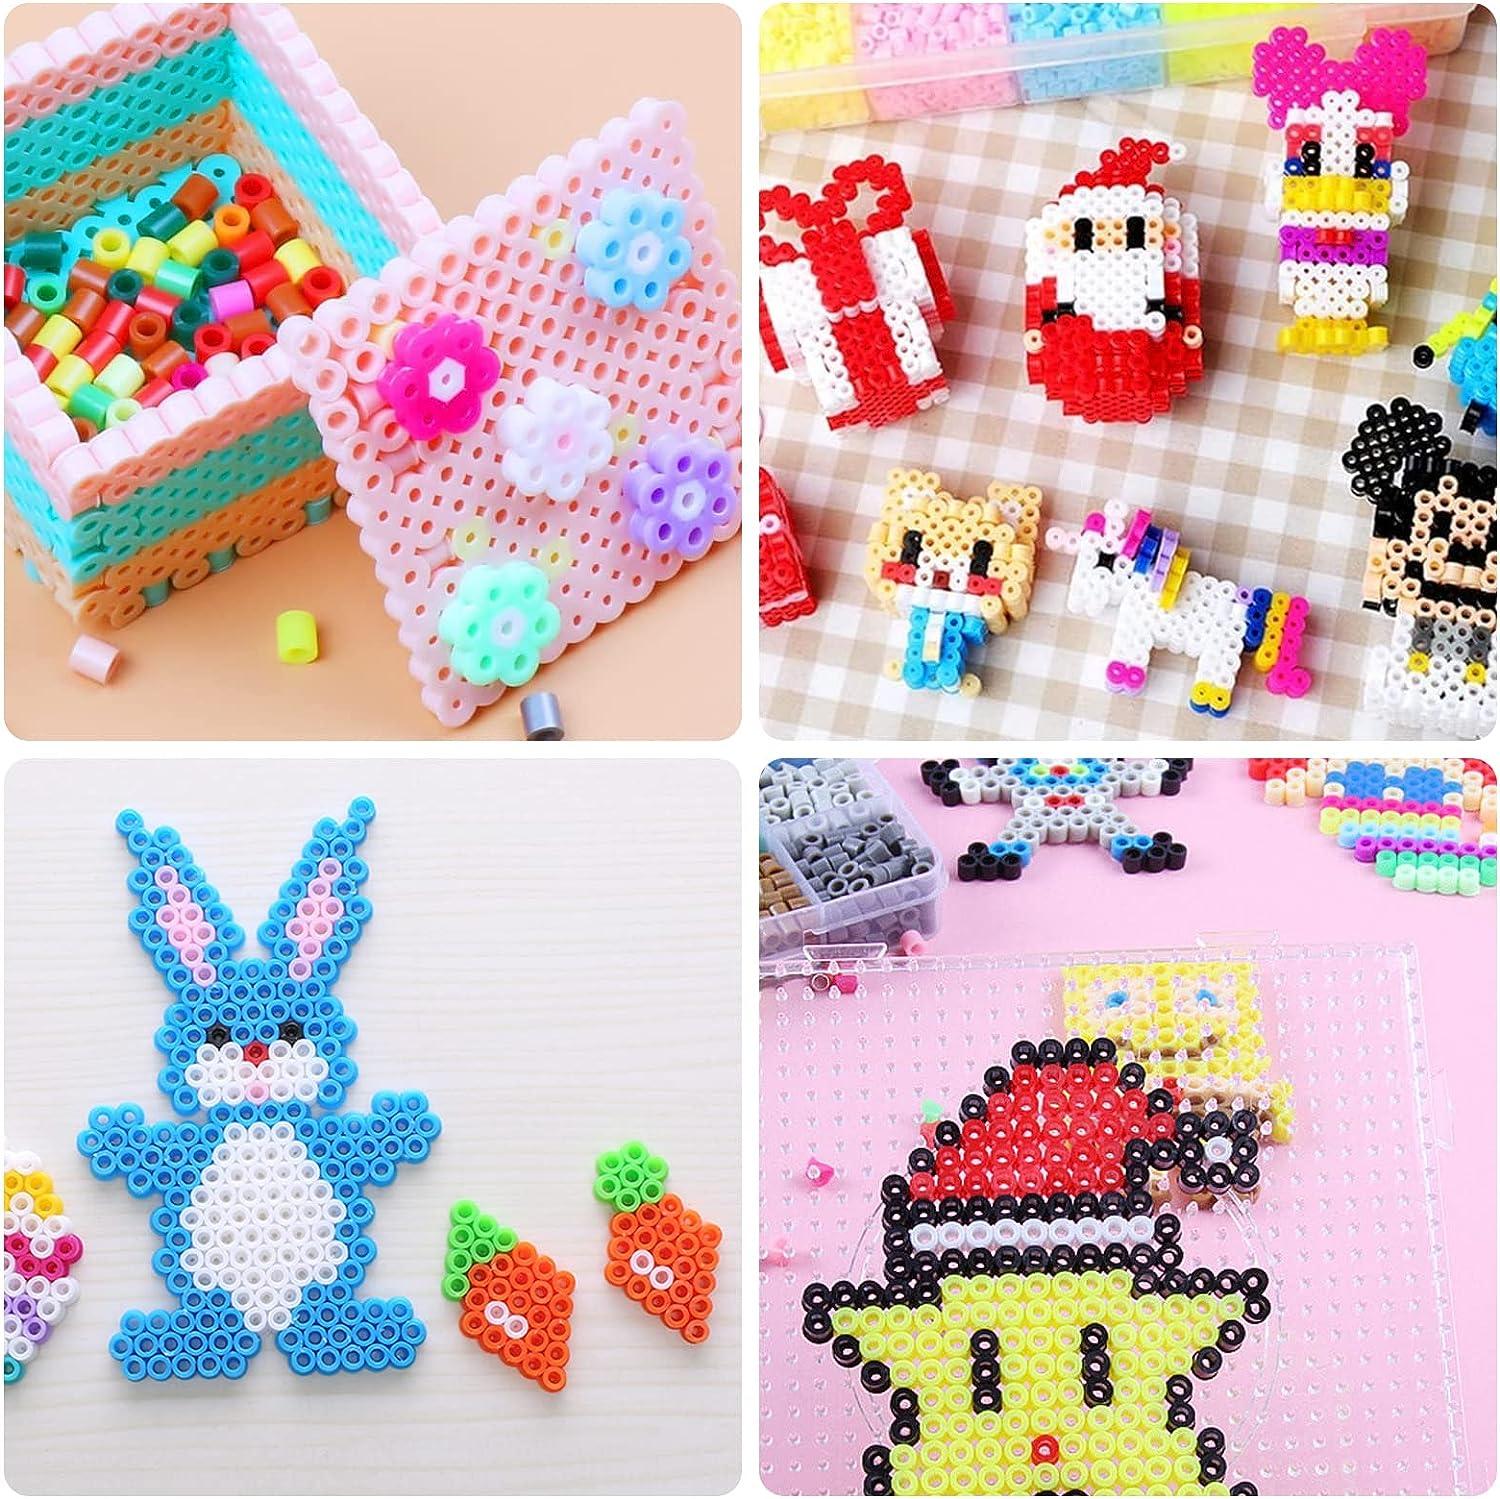 Frcolor Beads Board Bead Pegboard Fuse Pegboards Craft Boards Kids Plastic  Round Mini Square Iron Hexagon Diy Peg Tools 